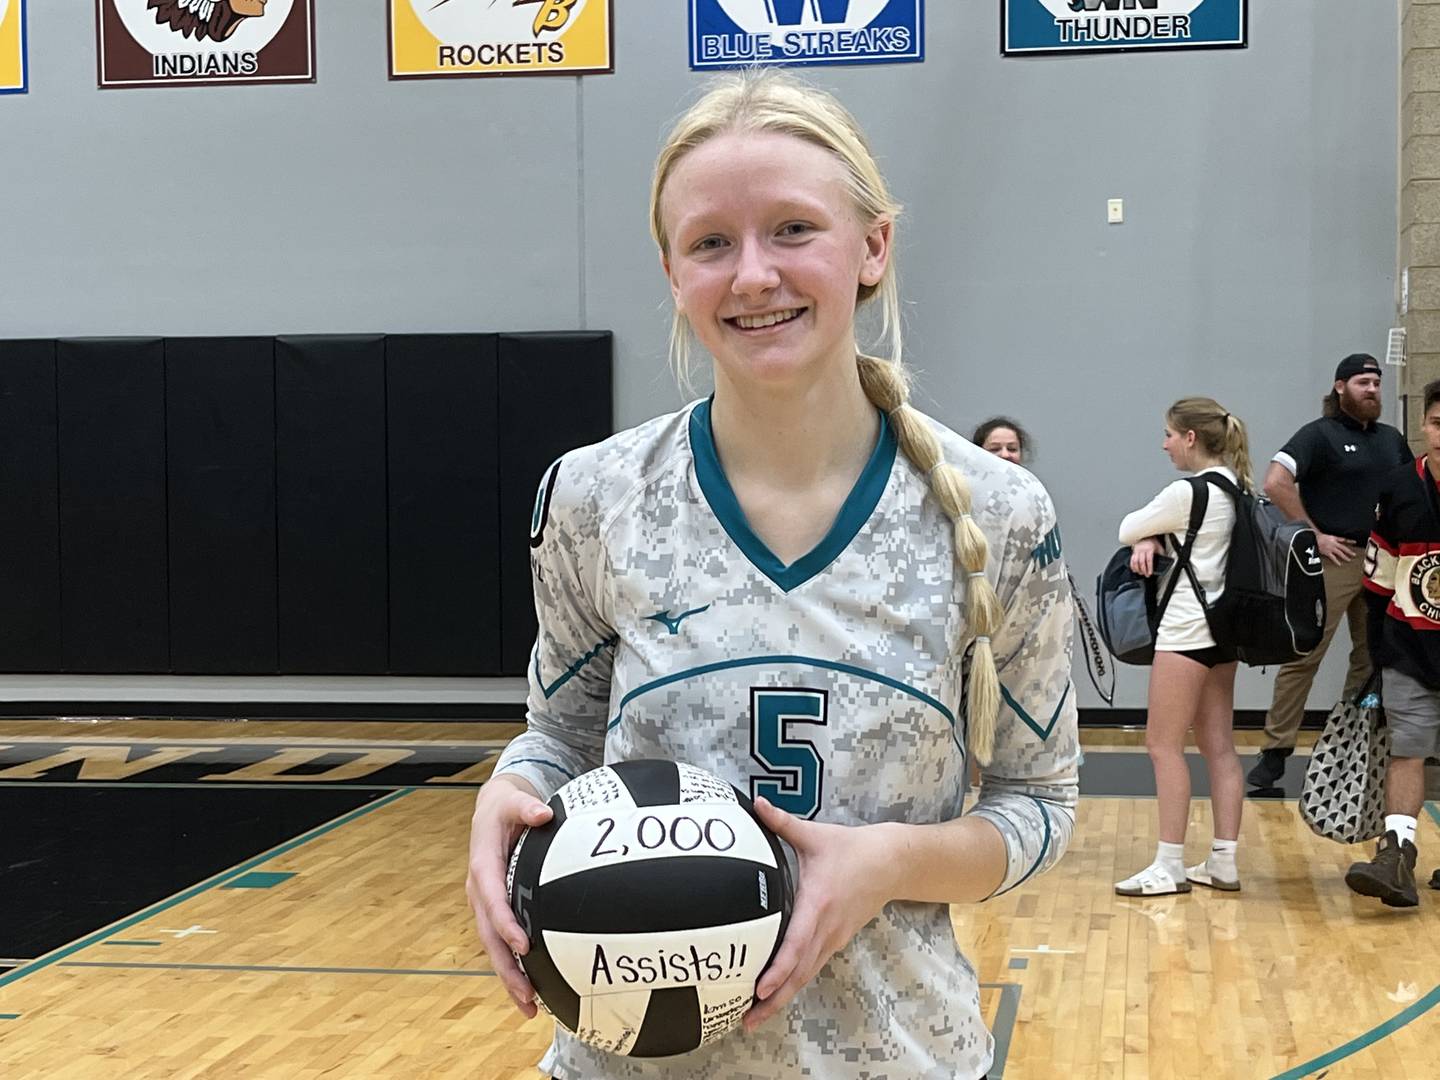 Woodstock North's Kylie Schulze surpassed 2,000 career assists Tuesday night in a 25-18, 25-19 Kishwaukee River Conference win against Richmond-Burton.